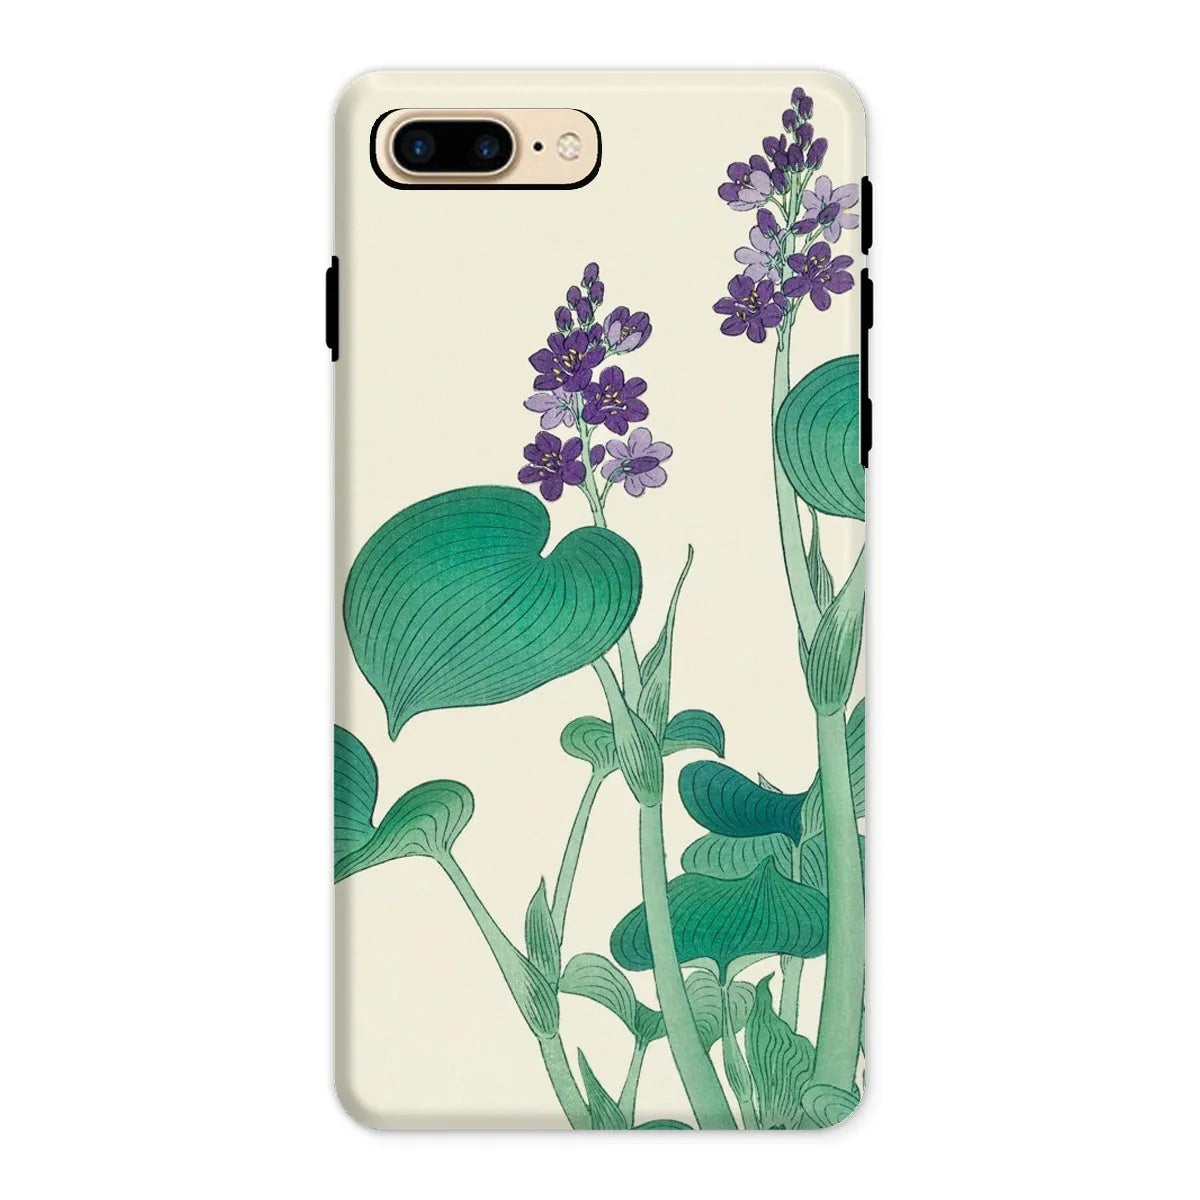 Blooming Hosta - Floral Aesthetic Art Phone Case - Ohara Koson - Iphone 8 Plus / Matte - Mobile Phone Cases - Aesthetic